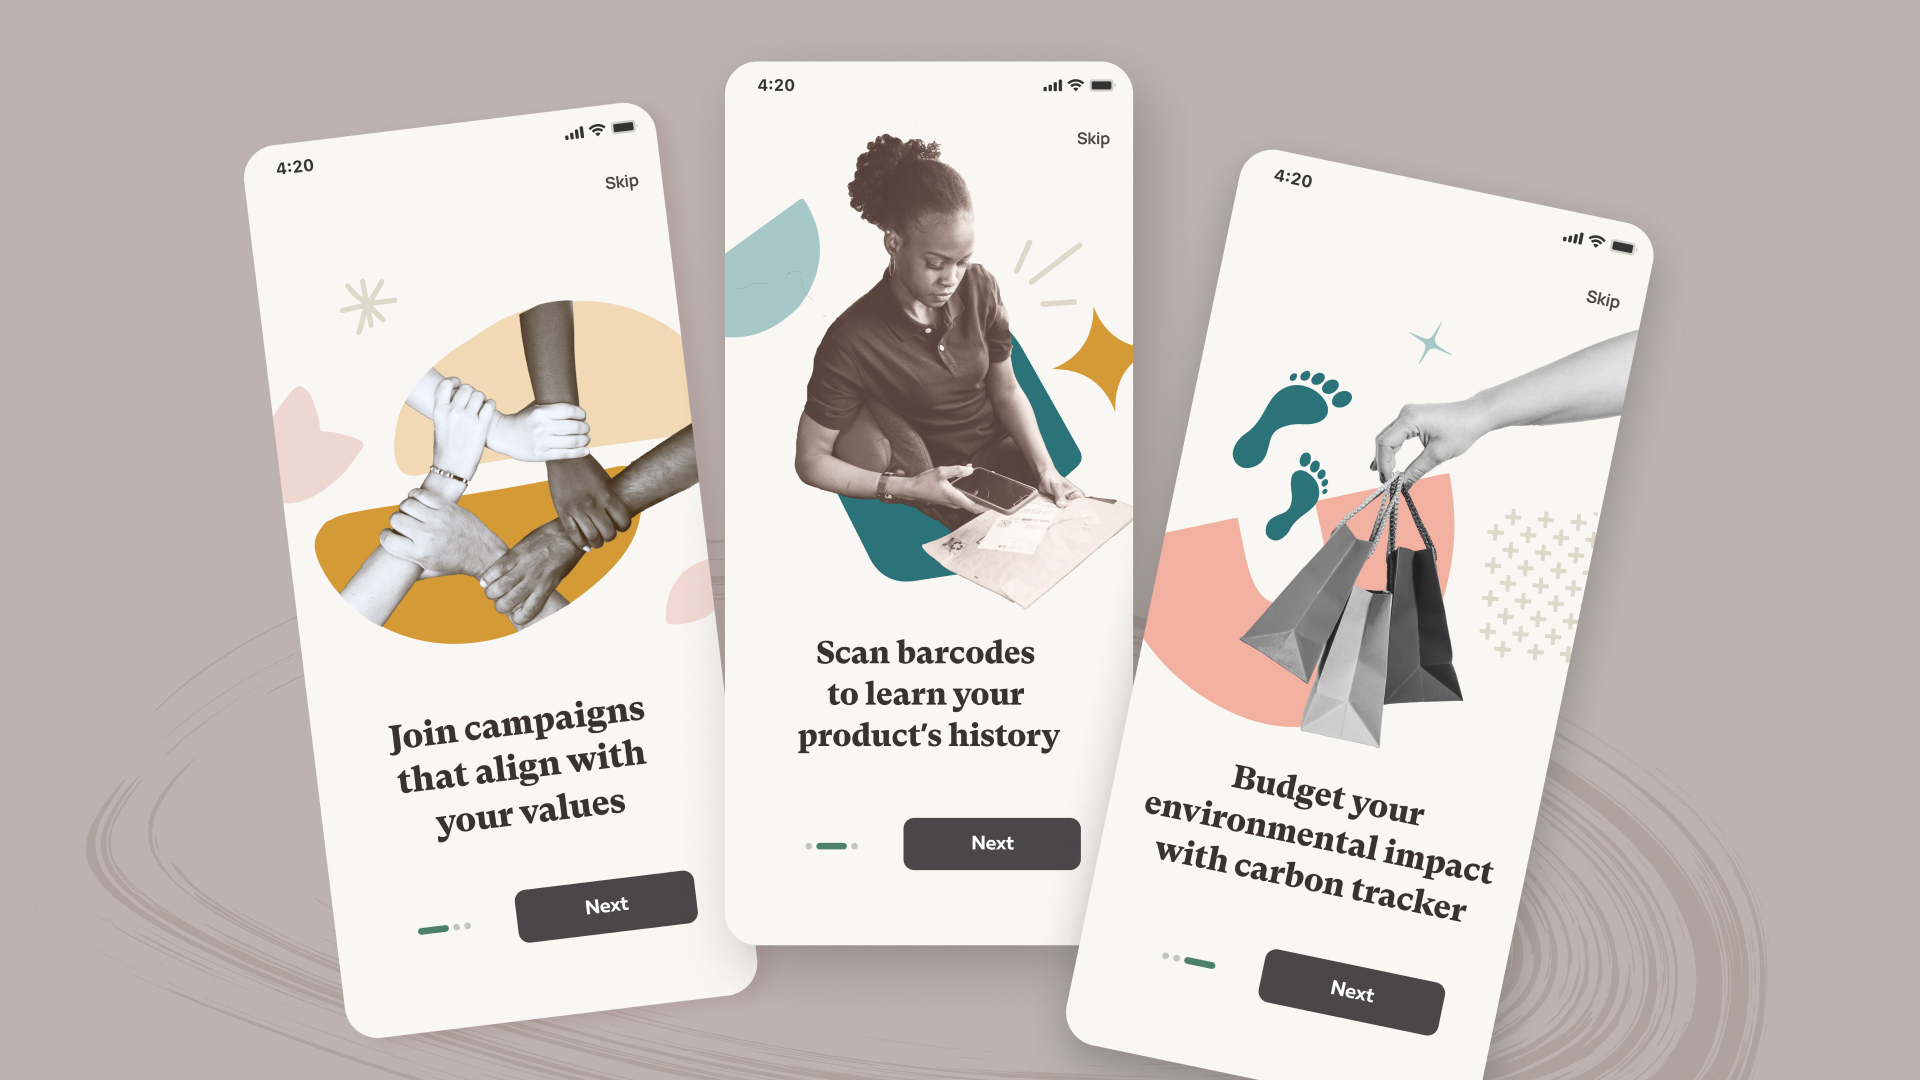 3 onboarding screens of revolv. text reads ‘join campaigns that align with your values’, ‘scan barcodes to learn product’s history’, and “budget your environmental impact with carbon tracker